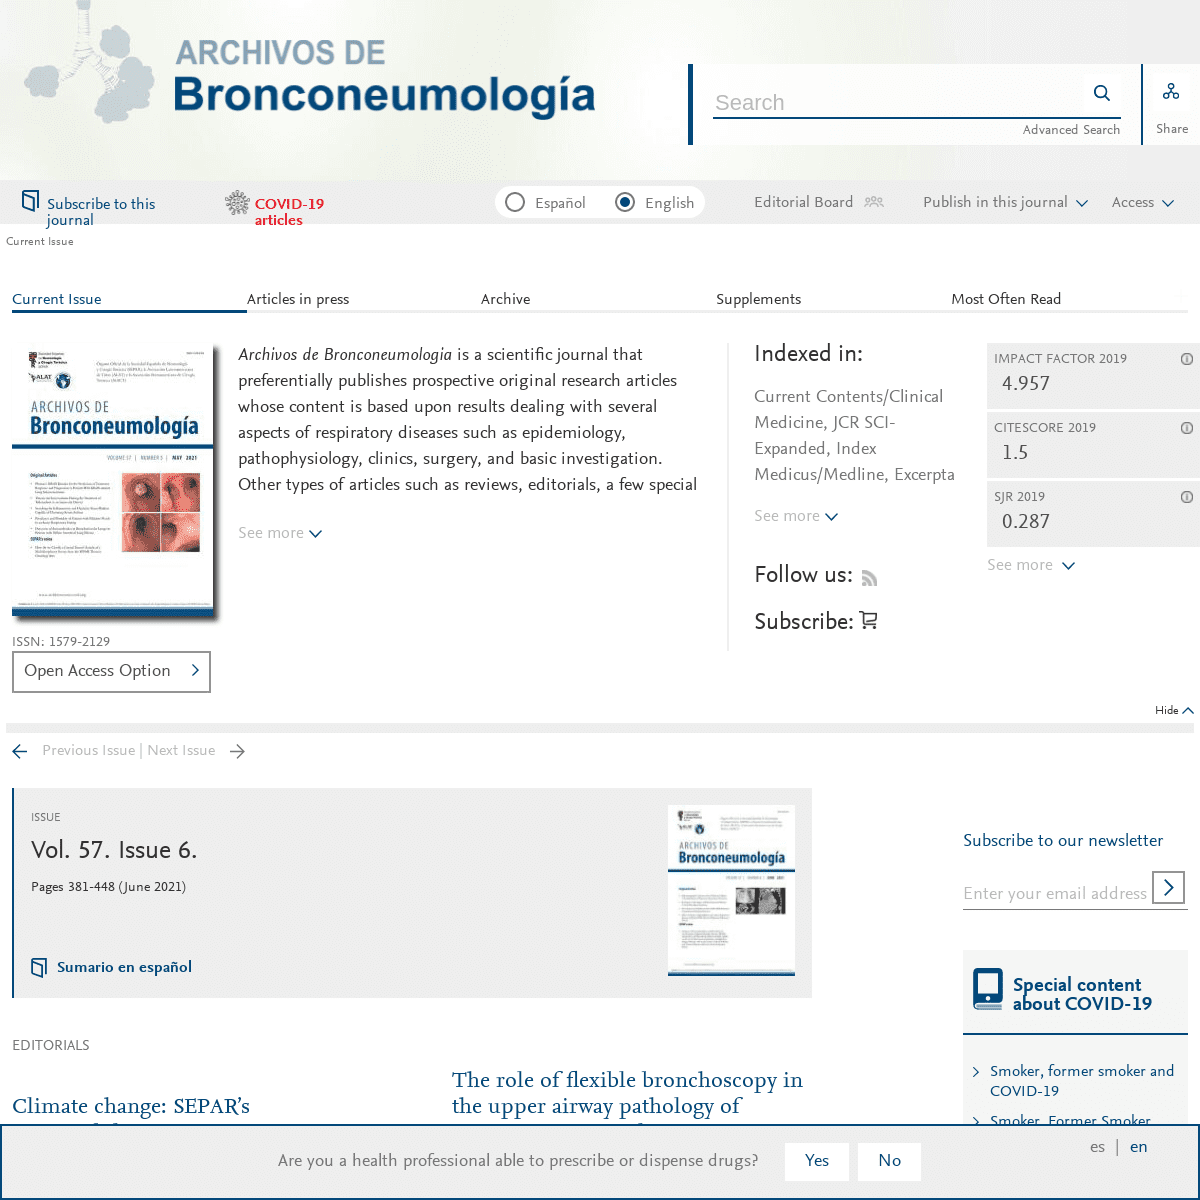 A complete backup of https://archbronconeumol.org